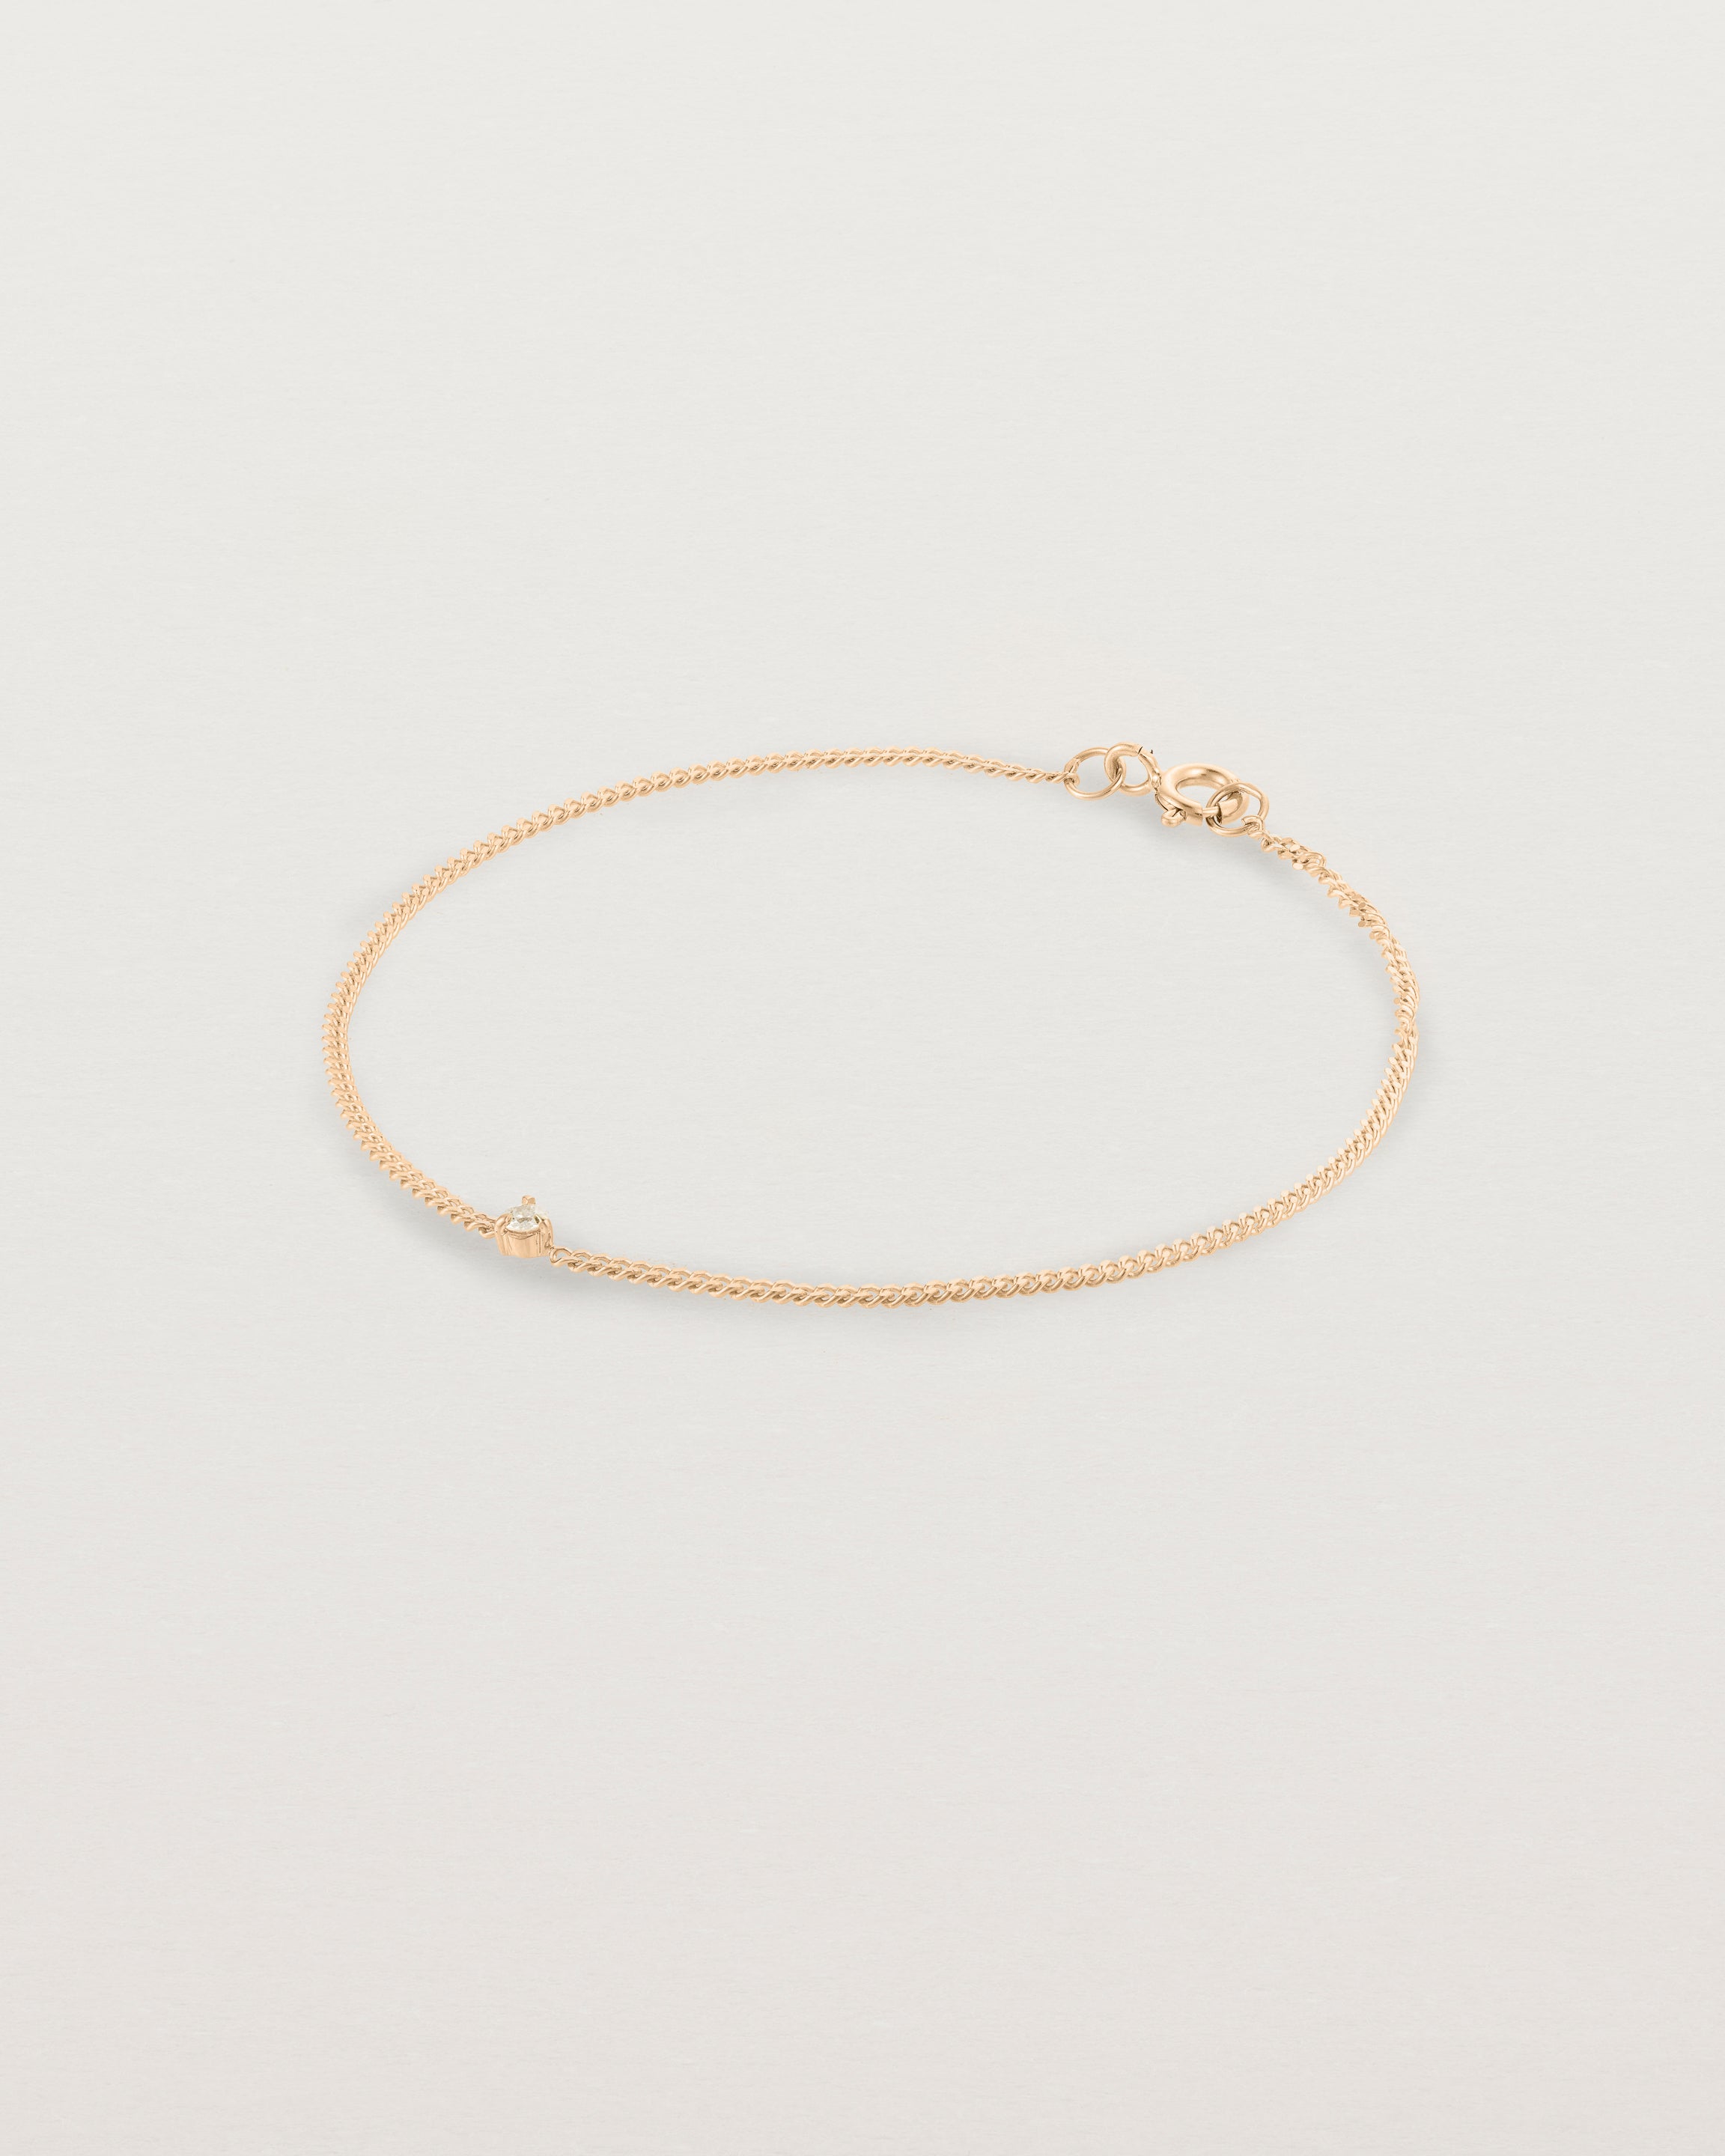 A rose gold chain bracelet featuring a single white old cut diamond